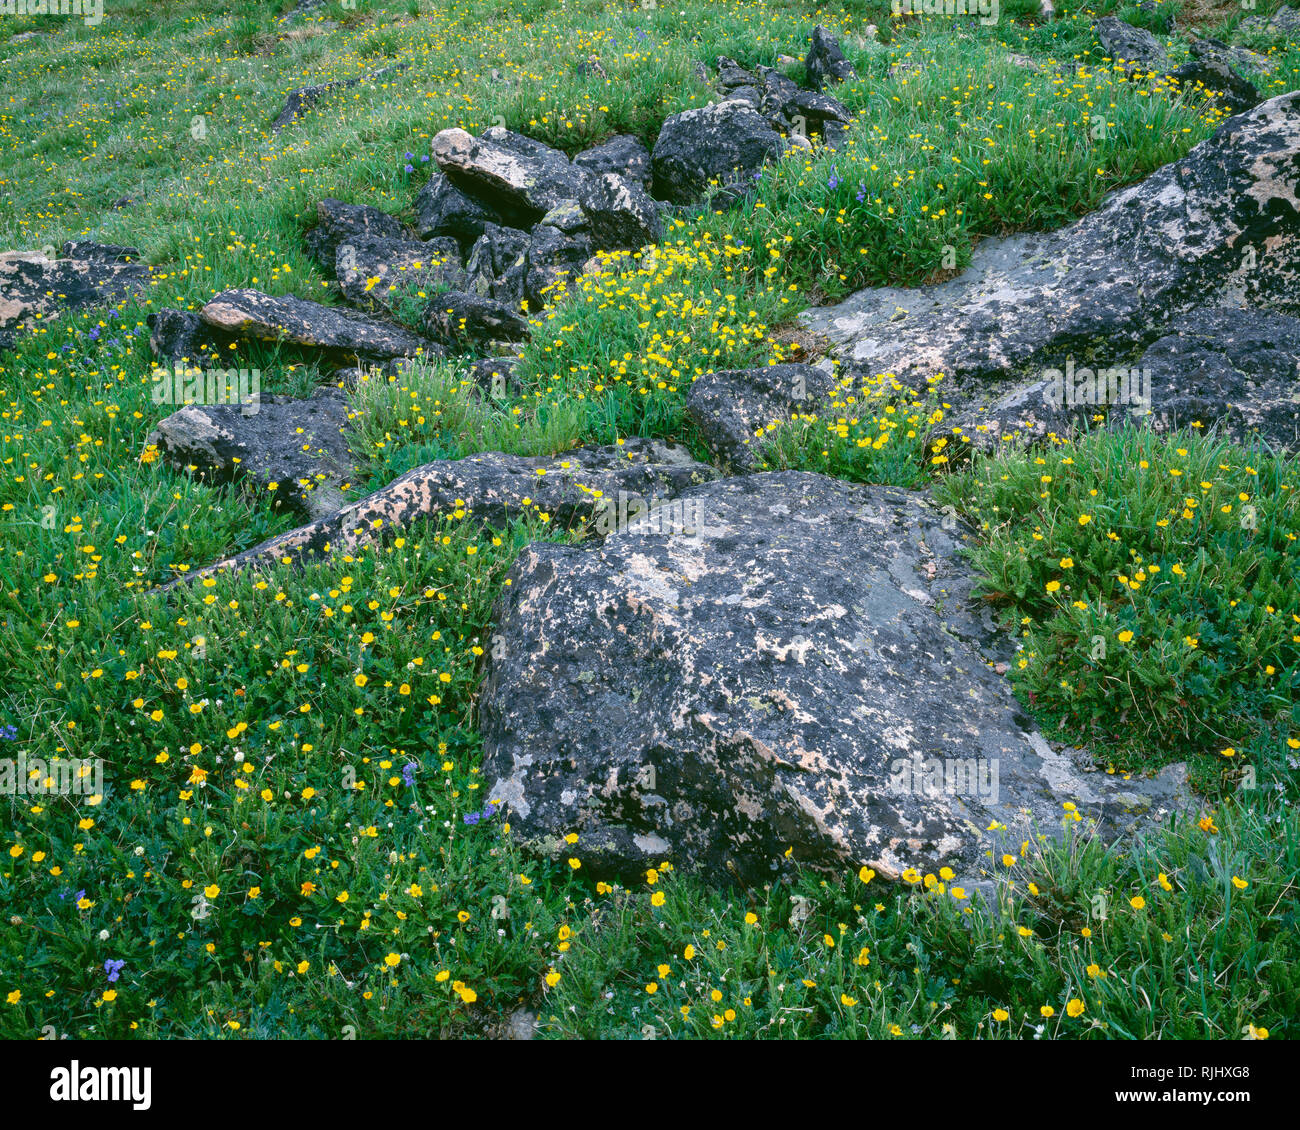 USA, Wyoming, Shoshone National Forest, Yellow blossoms of alpine avens surround lichen-covered rocks on Beartooth Plateau; Beartooth Mountains. Stock Photo